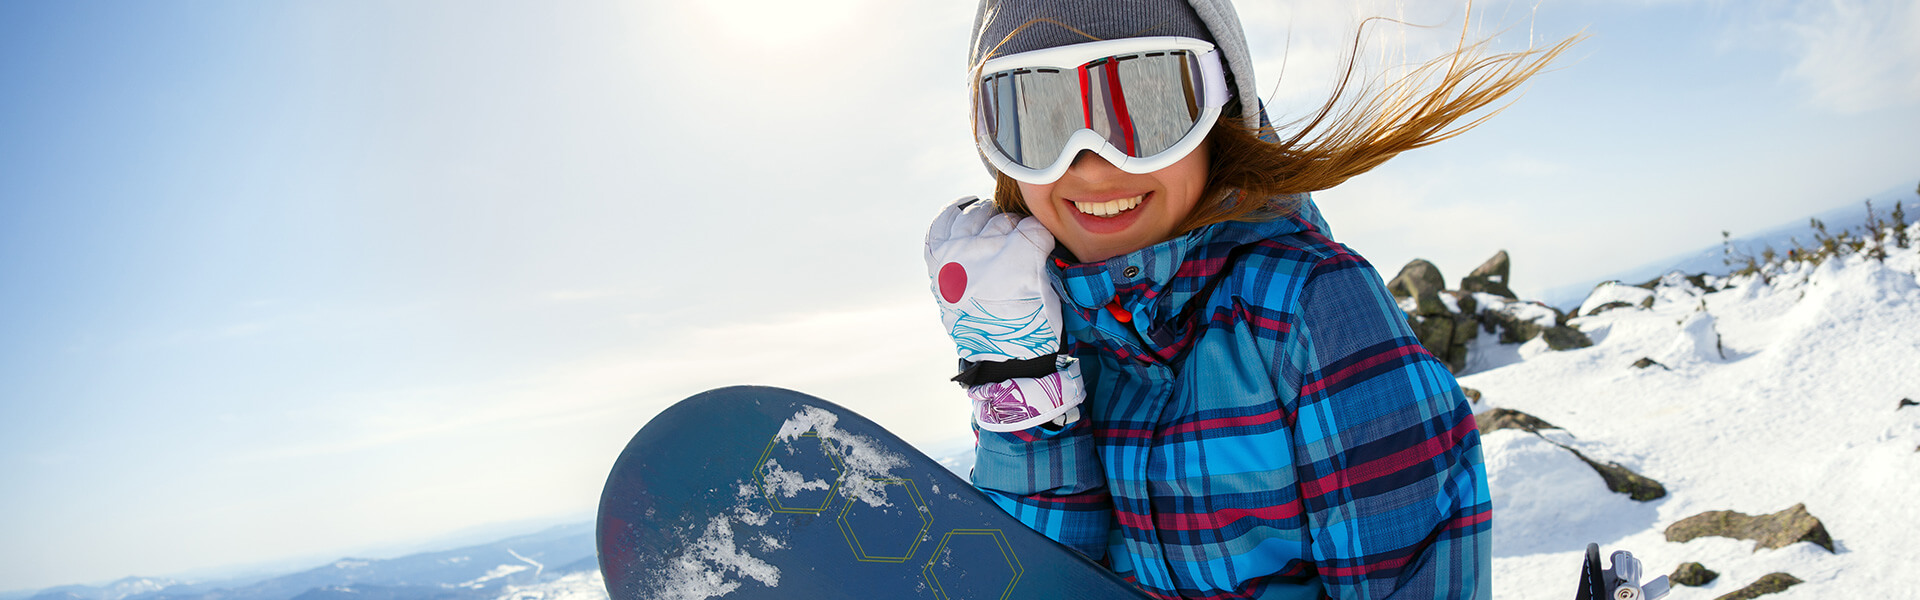 Female snowboarder smiling on the mountain